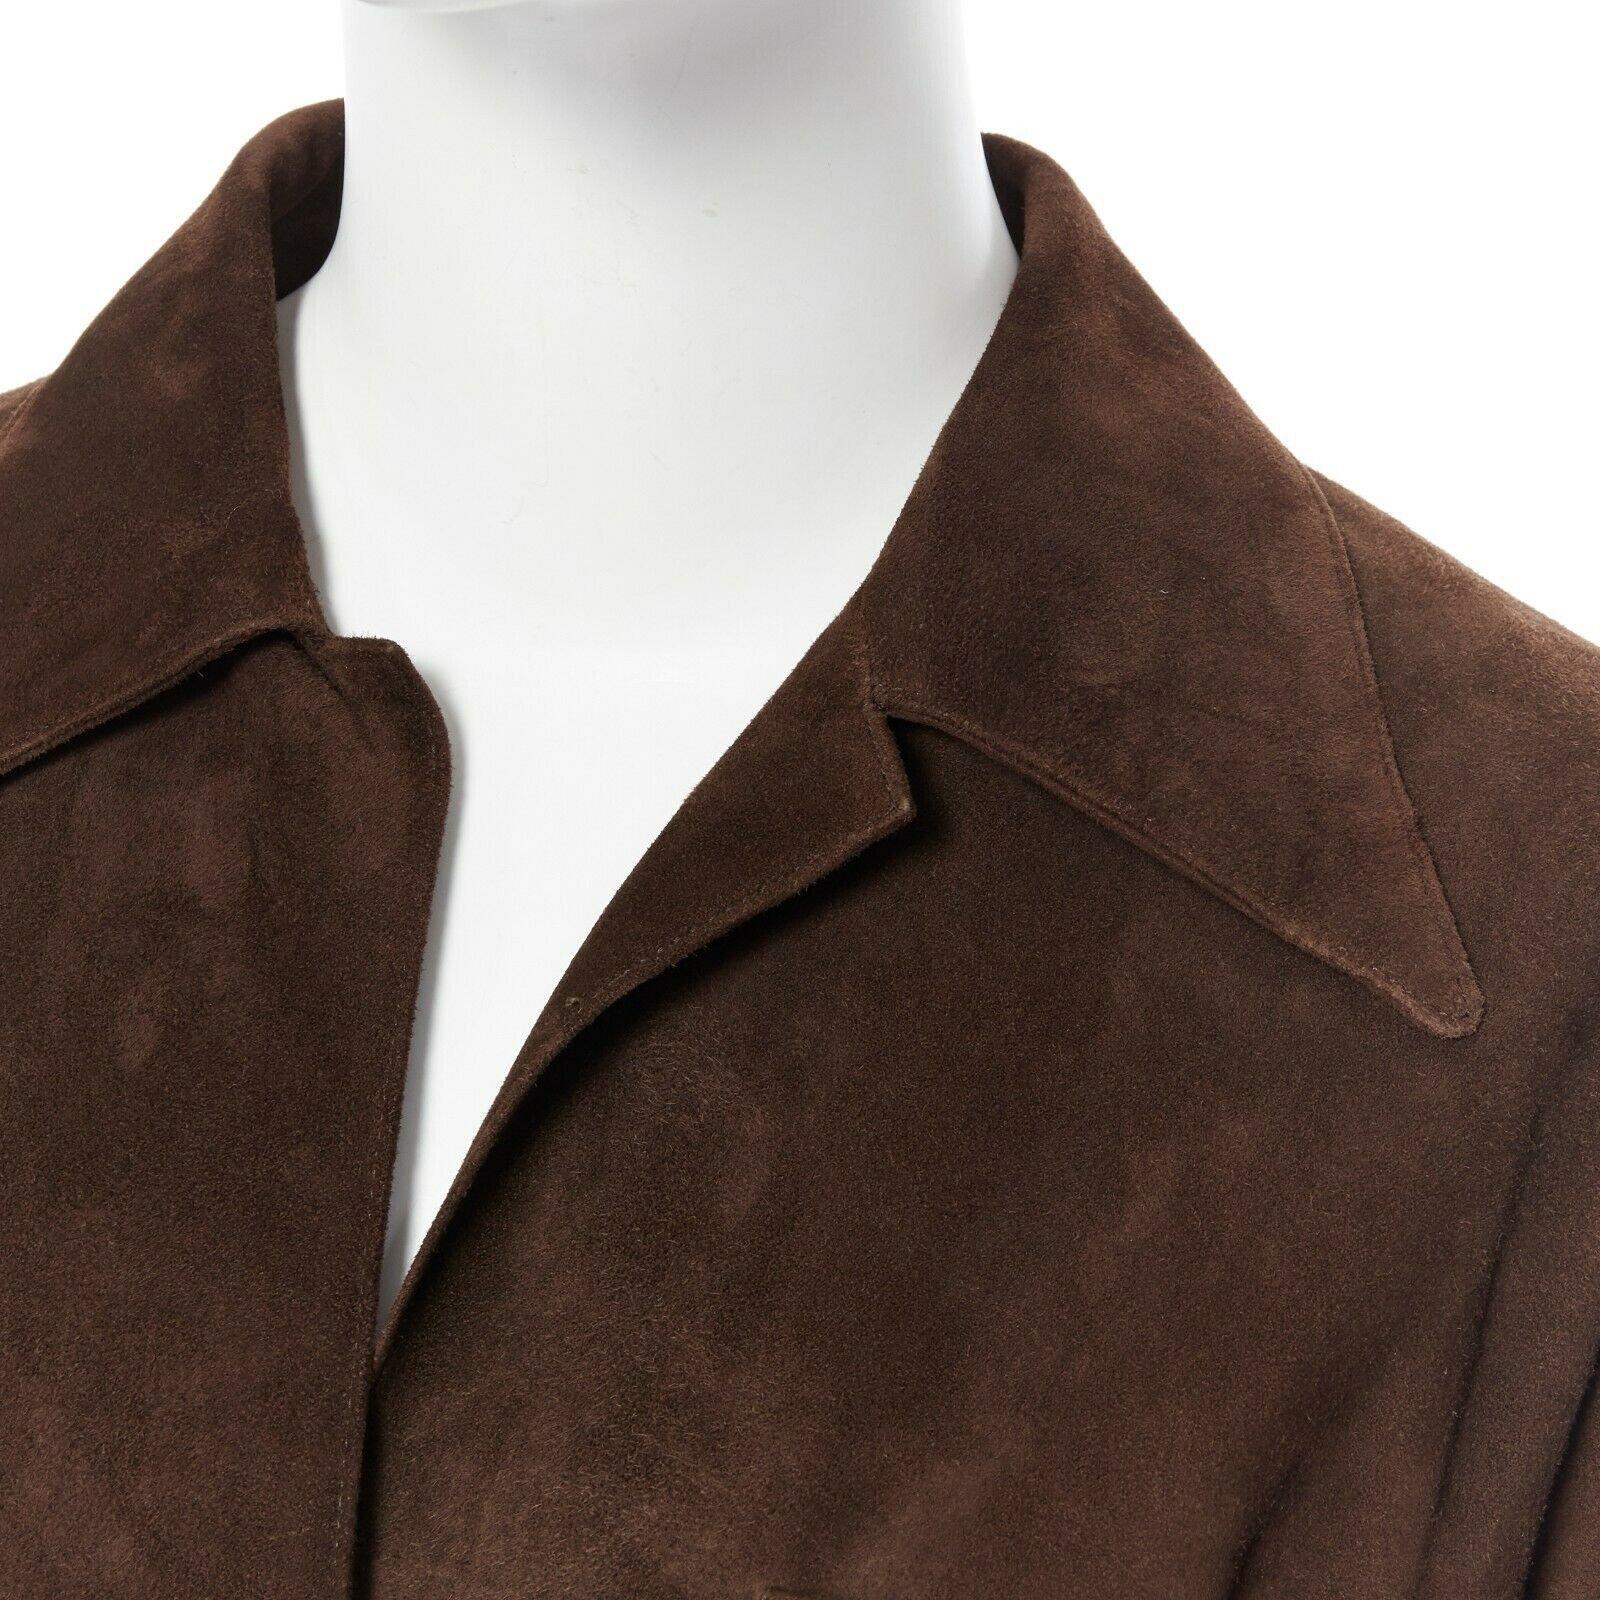 HERMES MARTIN MARGIELA vintage brown suede peak spread collar long shirt FR38 
Reference: CC/AECG00284 
Brand: Hermes 
Material: Suede 
Color: Brown 
Pattern: Solid 
Closure: Button 
Extra Detail: Elongated shirt. Peaked spread collar. Button front